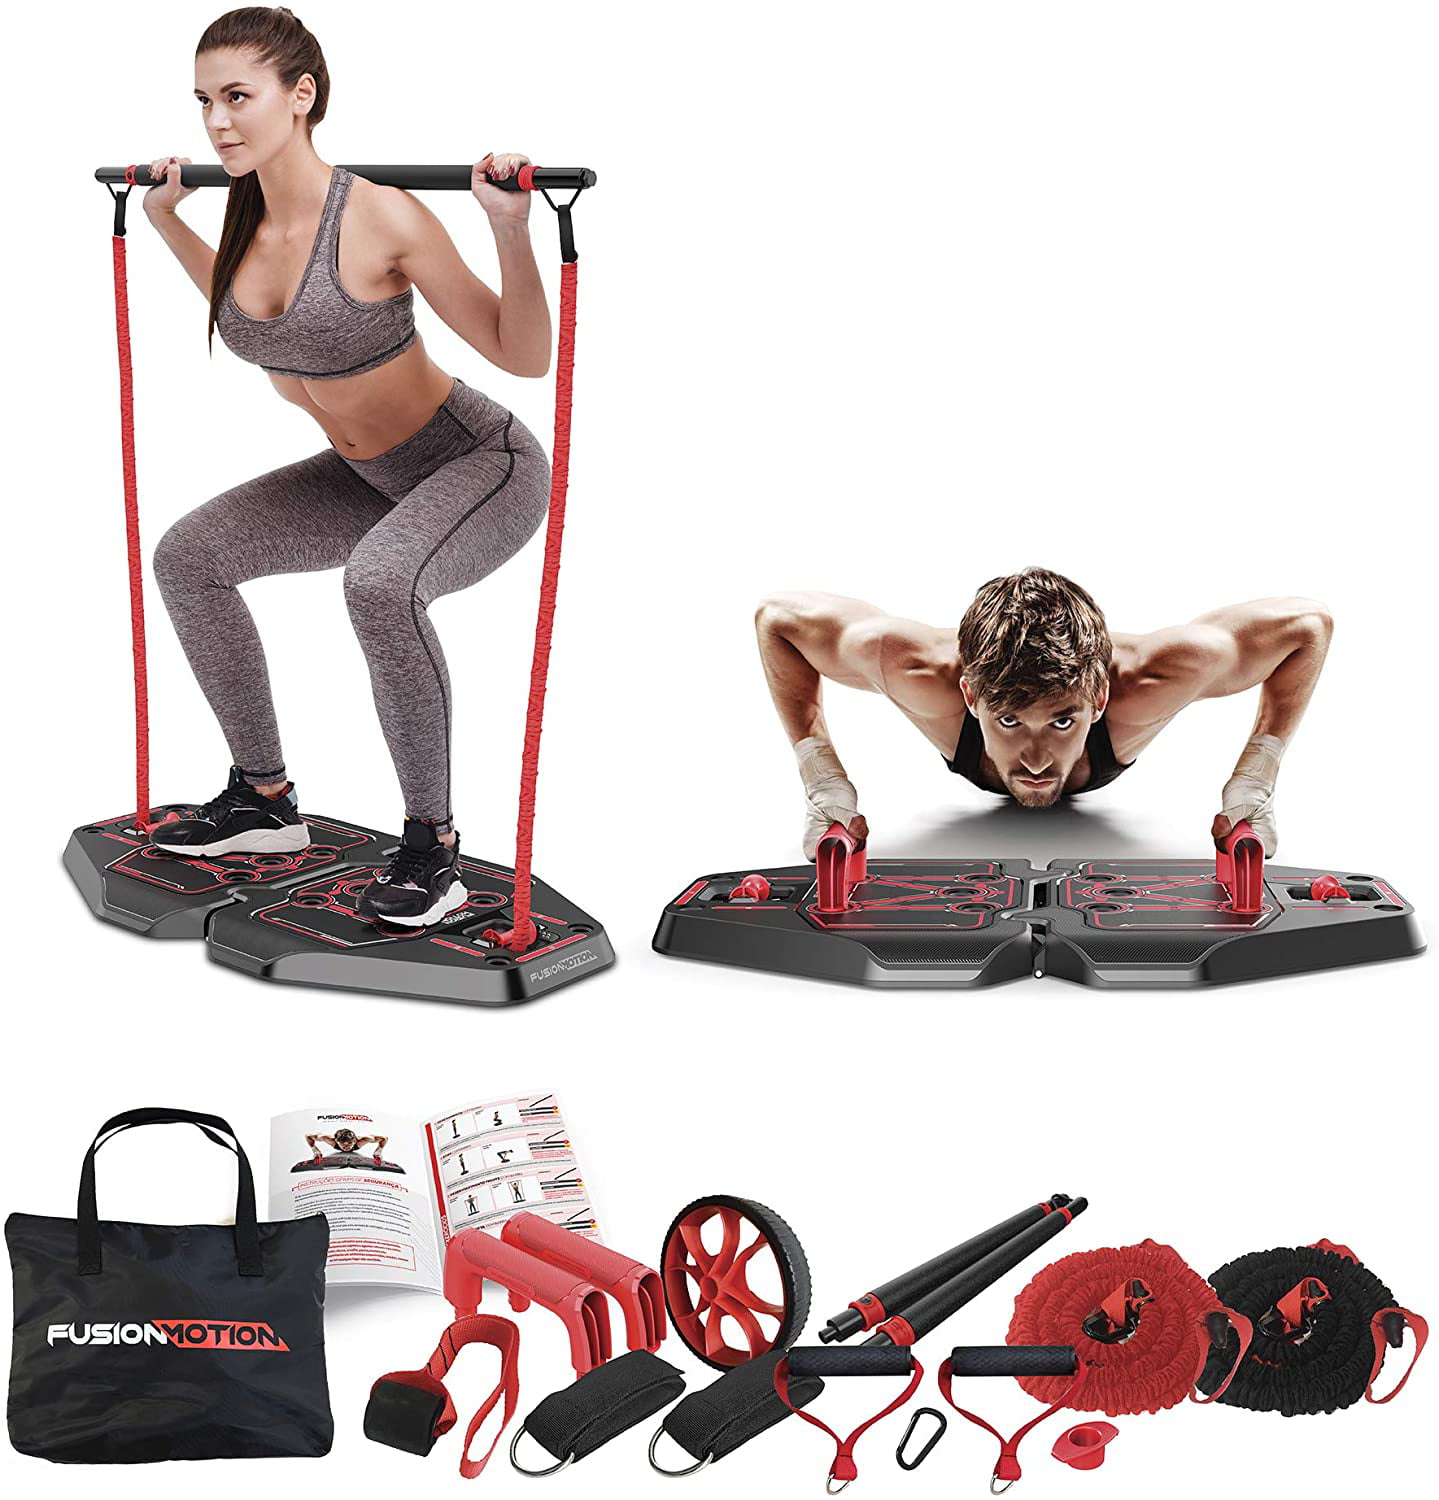 Fusion Motion Portable Gym with 8 Accessories Including Heavy Resistance  Bands Tricep Bar Ab Roller Wheel Pulleys and More - Full Body Workout Home  